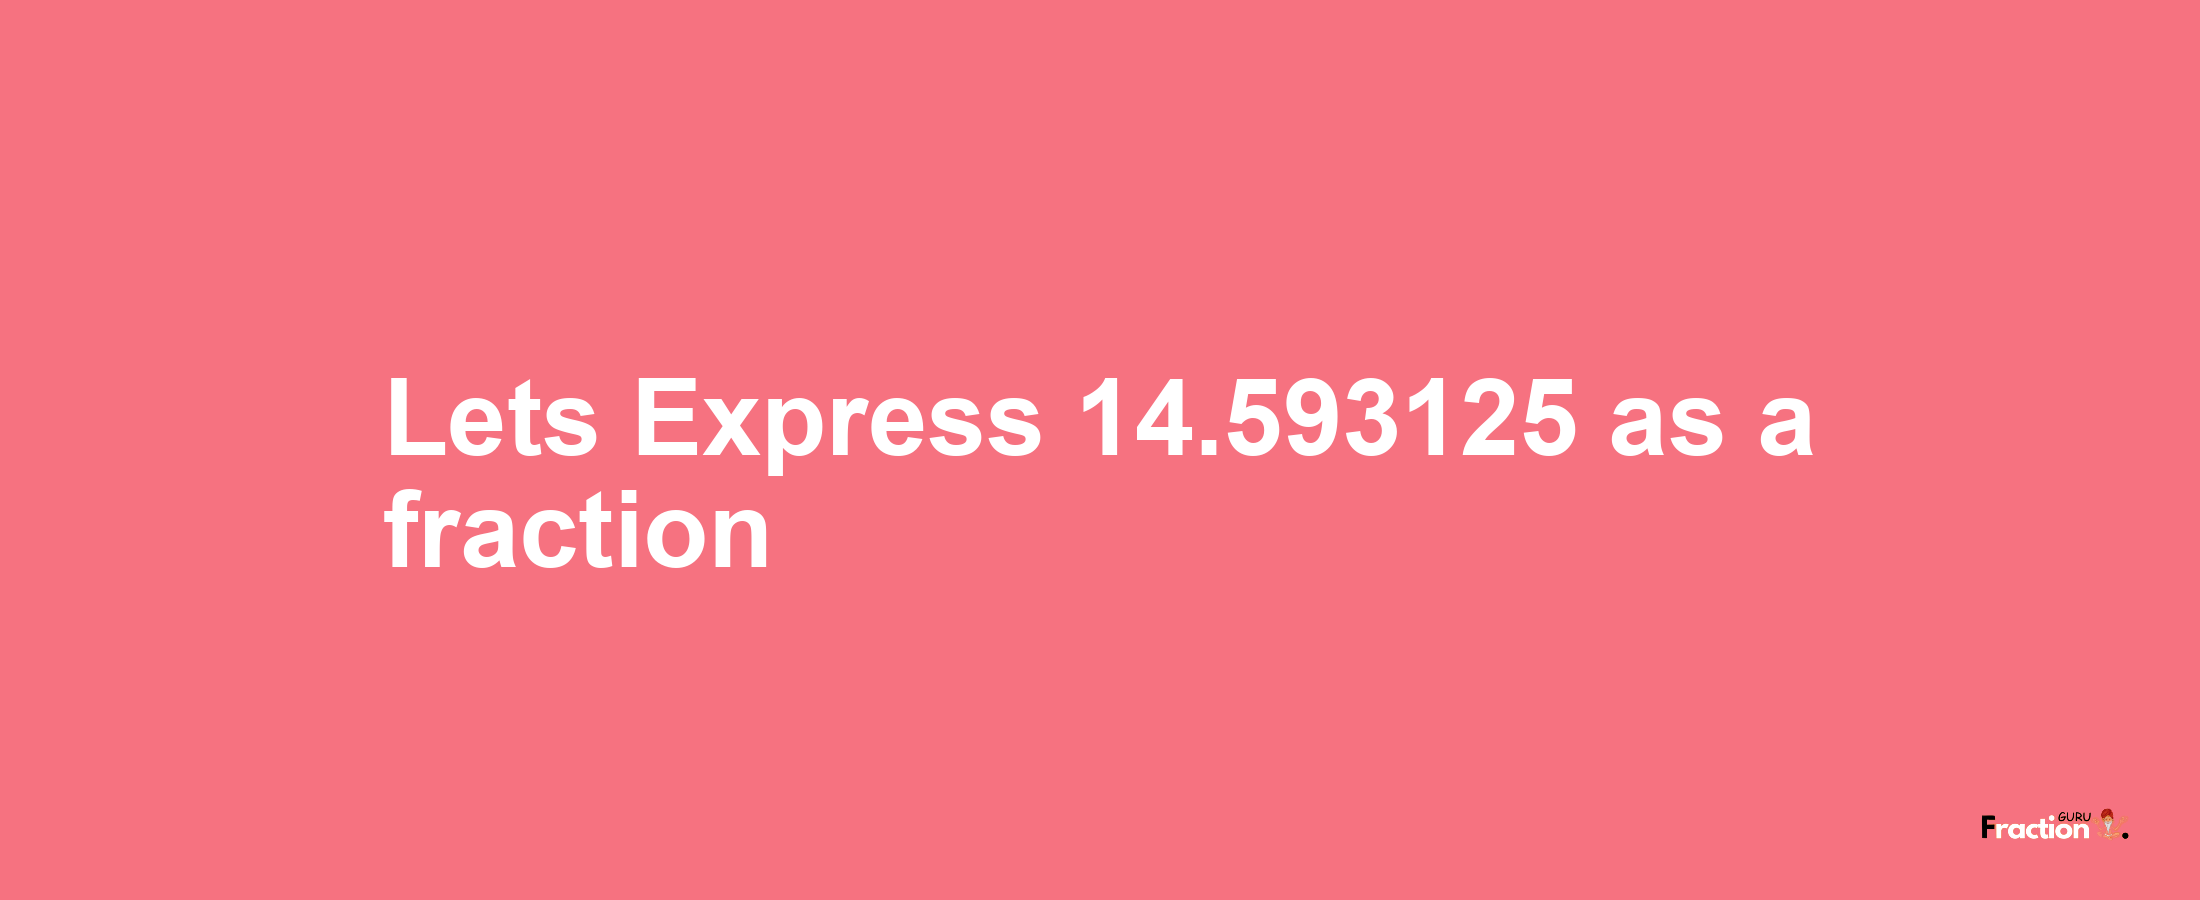 Lets Express 14.593125 as afraction